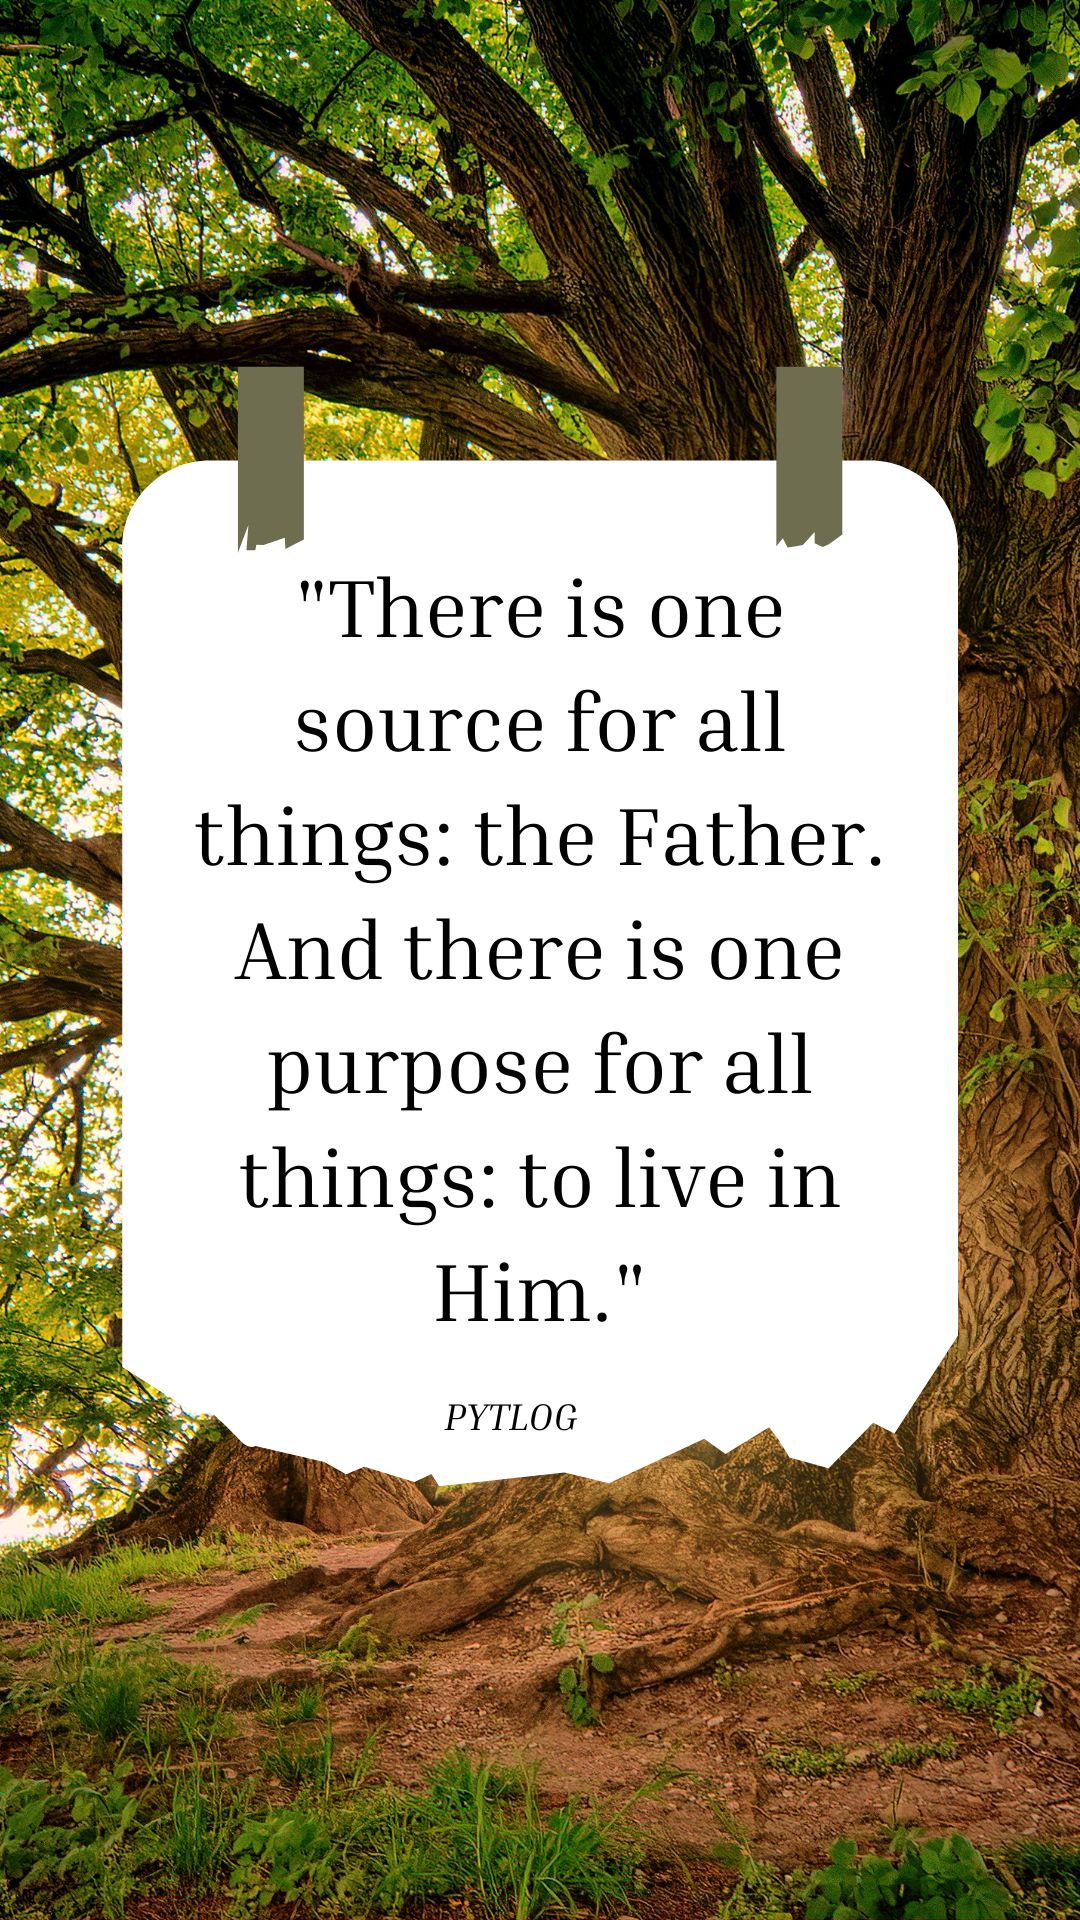 Inspirational Quotes, There is one source for all things: the Father. And there is one purpose for all things: to live in Him